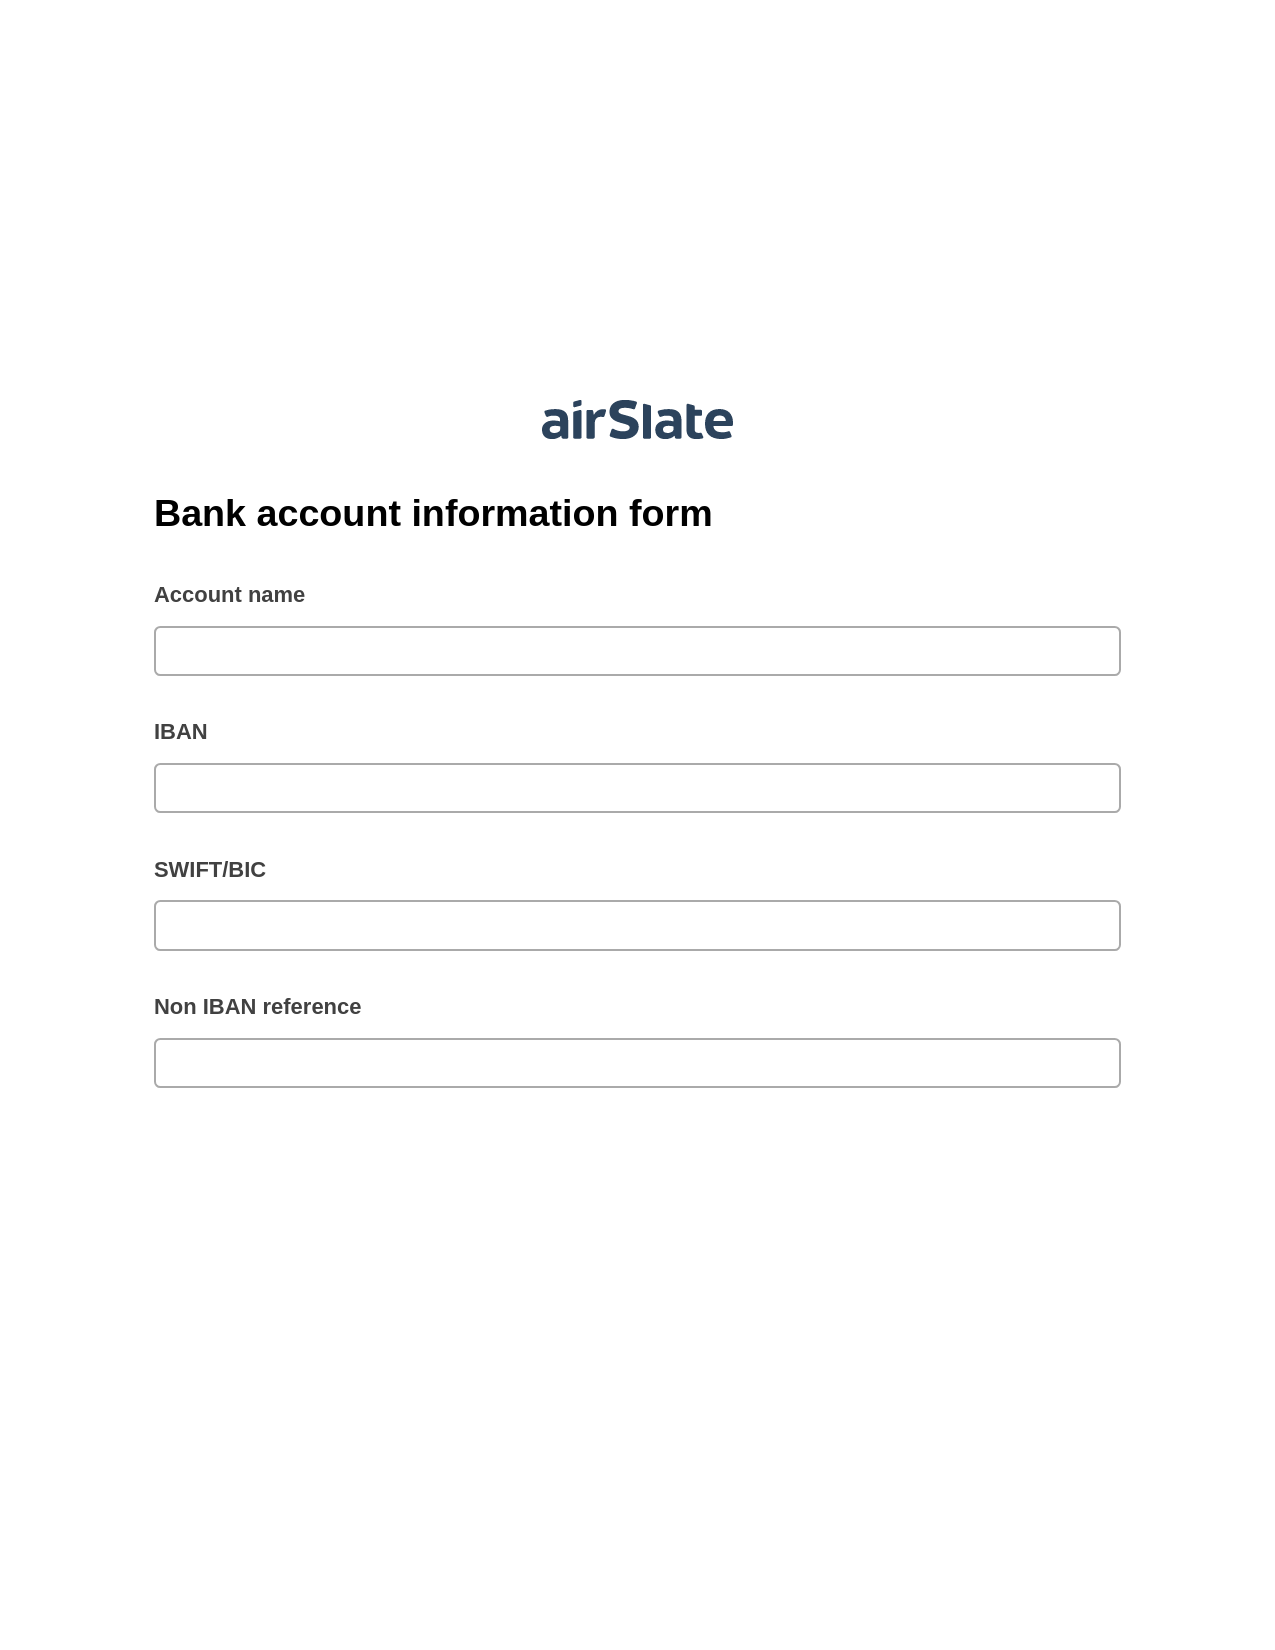 Bank account information form Pre-fill Document Bot, Unassign Role Bot, Email Notification Postfinish Bot